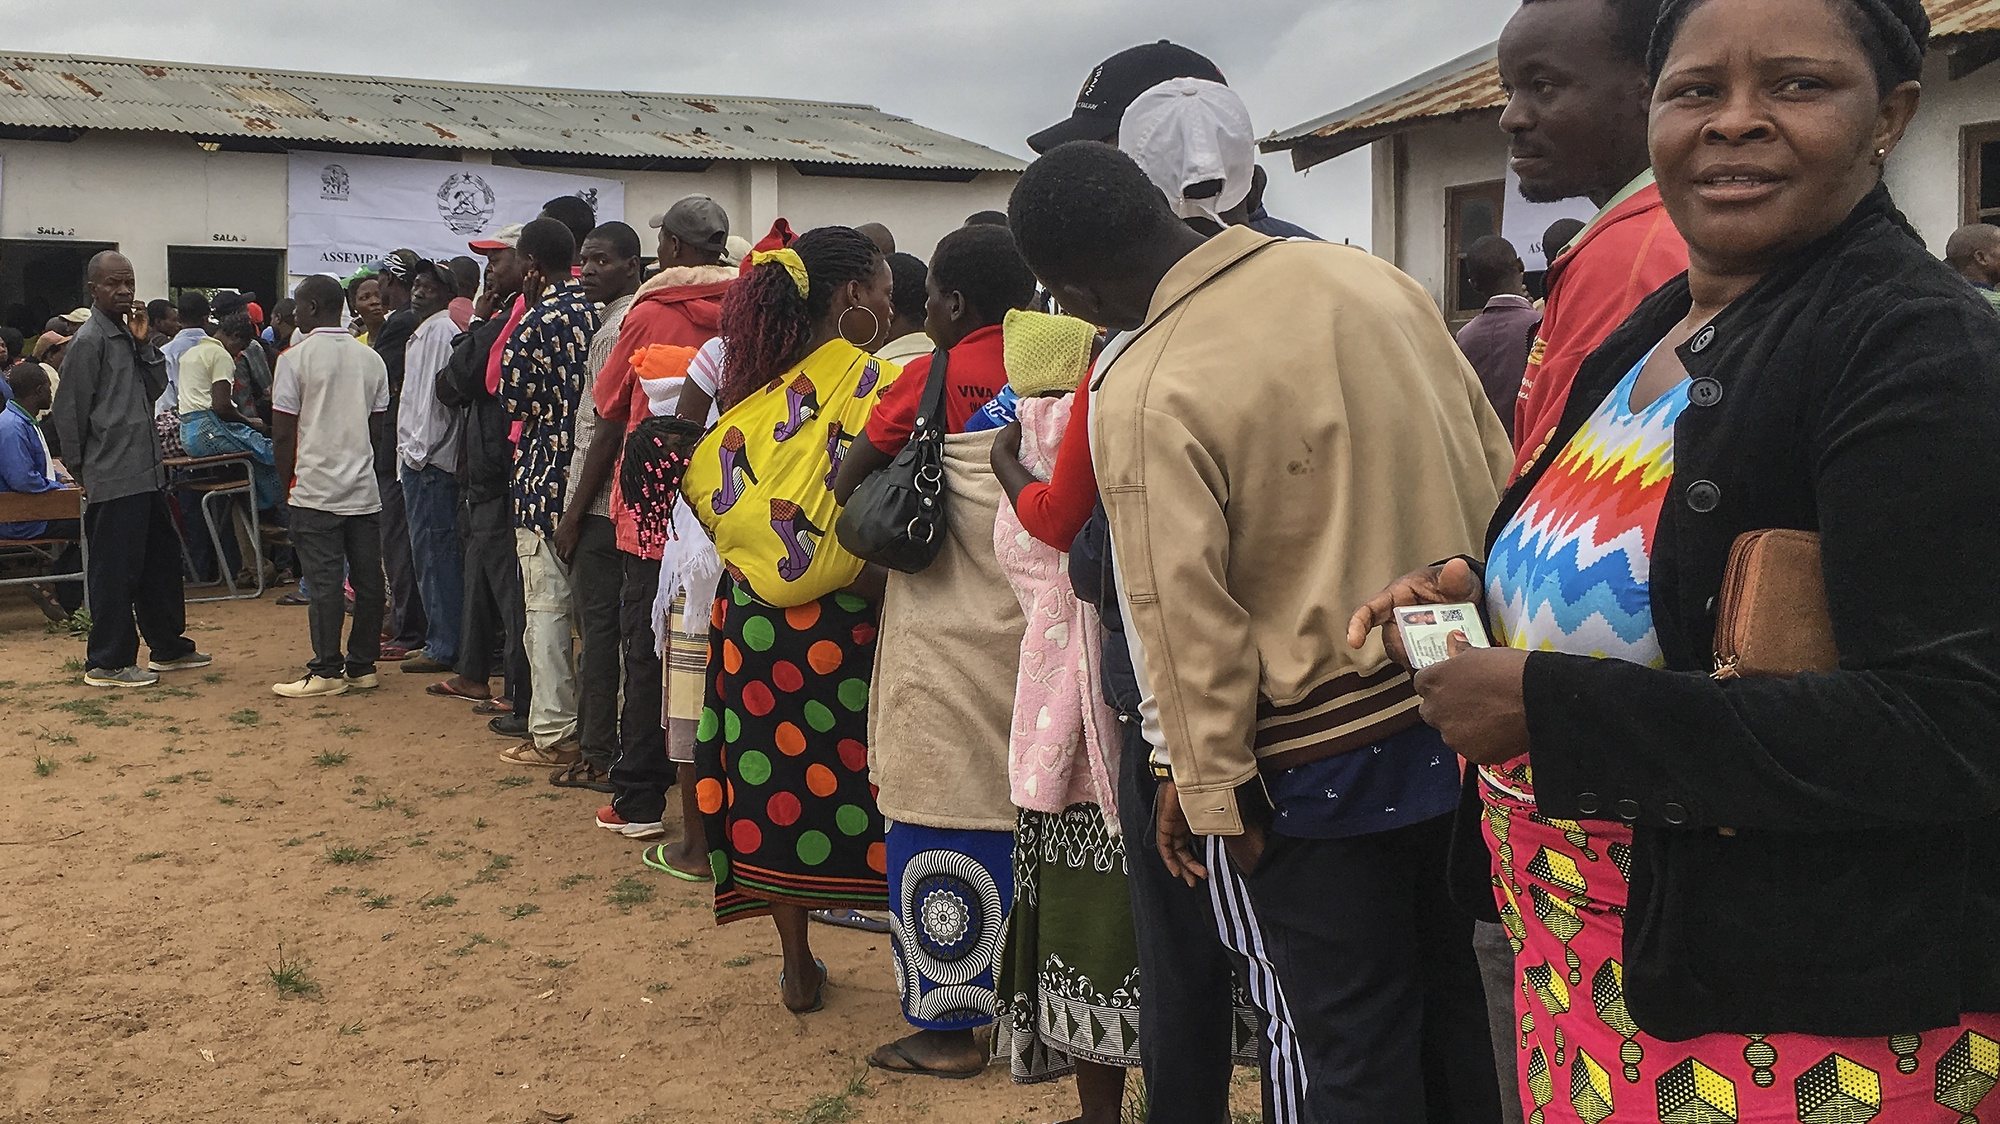 epa07921897 People queue in line as they wait to vote outside a polling station in Chimoio, Manica Province, Mozambique, 15 October 2019. Some 12.9 million Mozambican voters will choose the President of the Republic, ten provincial assemblies and their governors, as well as 250 members of the Assembly of the Republic.  EPA/ANDRE CATUEIRA